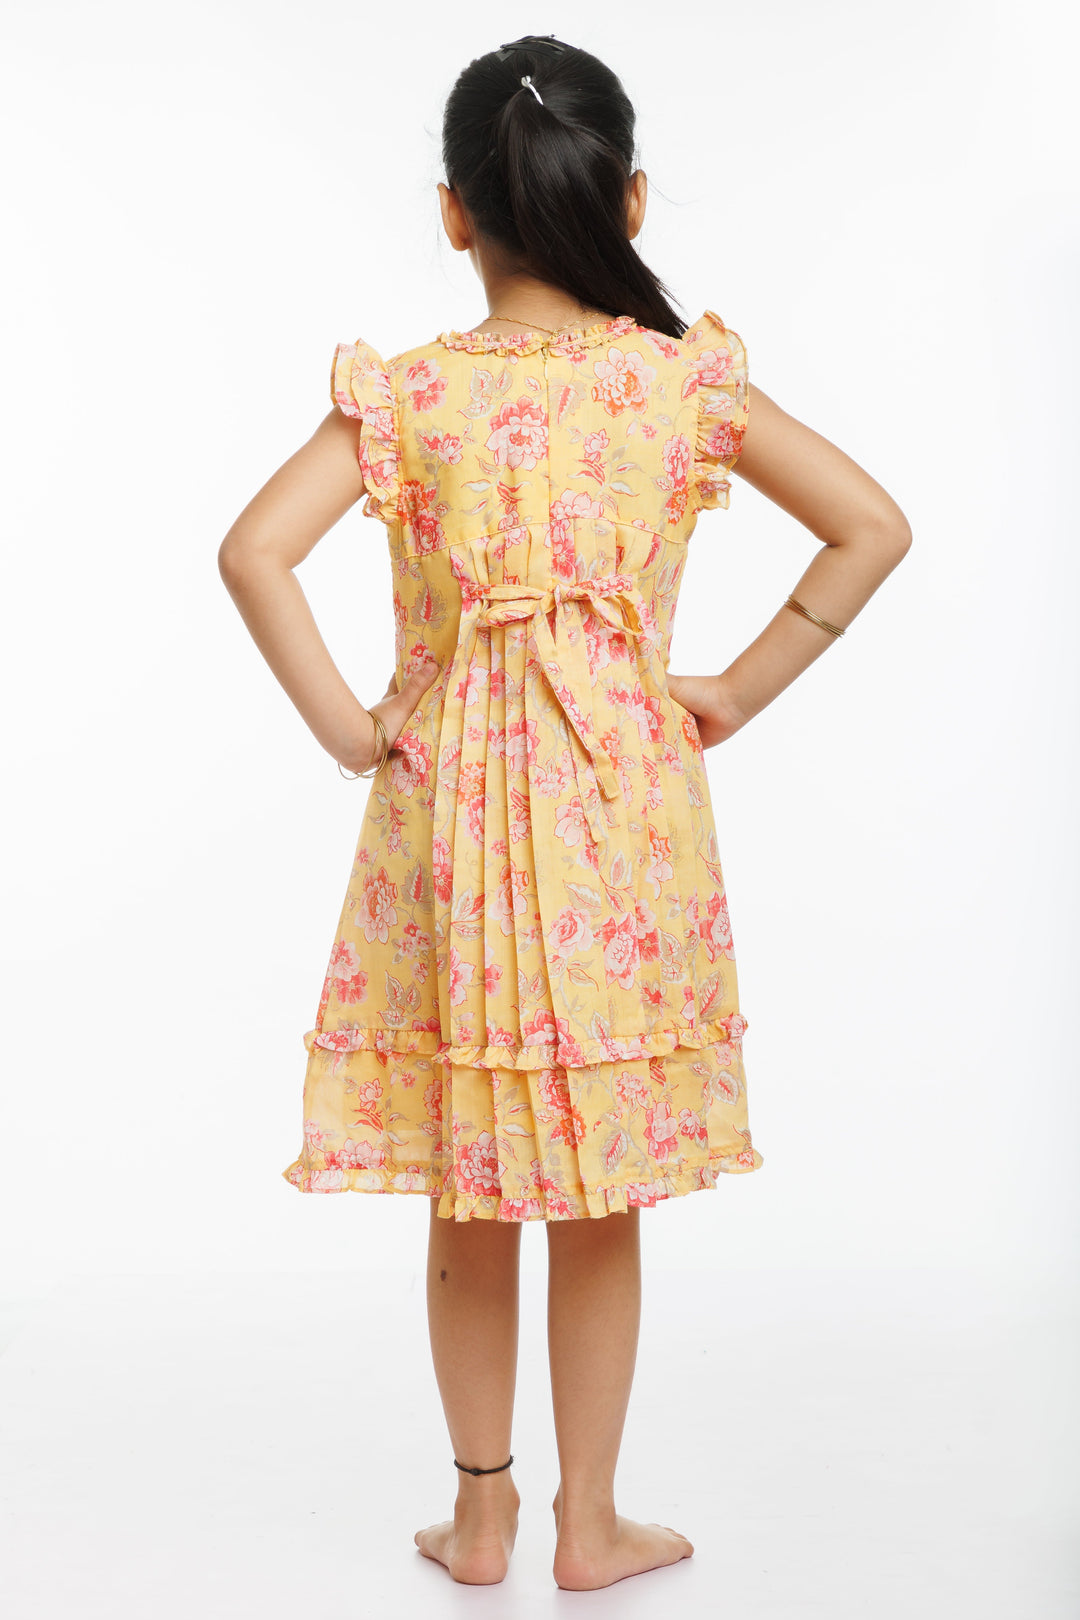 The Nesavu Girls Cotton Frock Sunshine and Blossoms: Girls Yellow Lace-Accentuated Floral Dress Nesavu Get the Latest Girls' Yellow Floral Cotton Dress | Perfect for Spring | The Nesavu